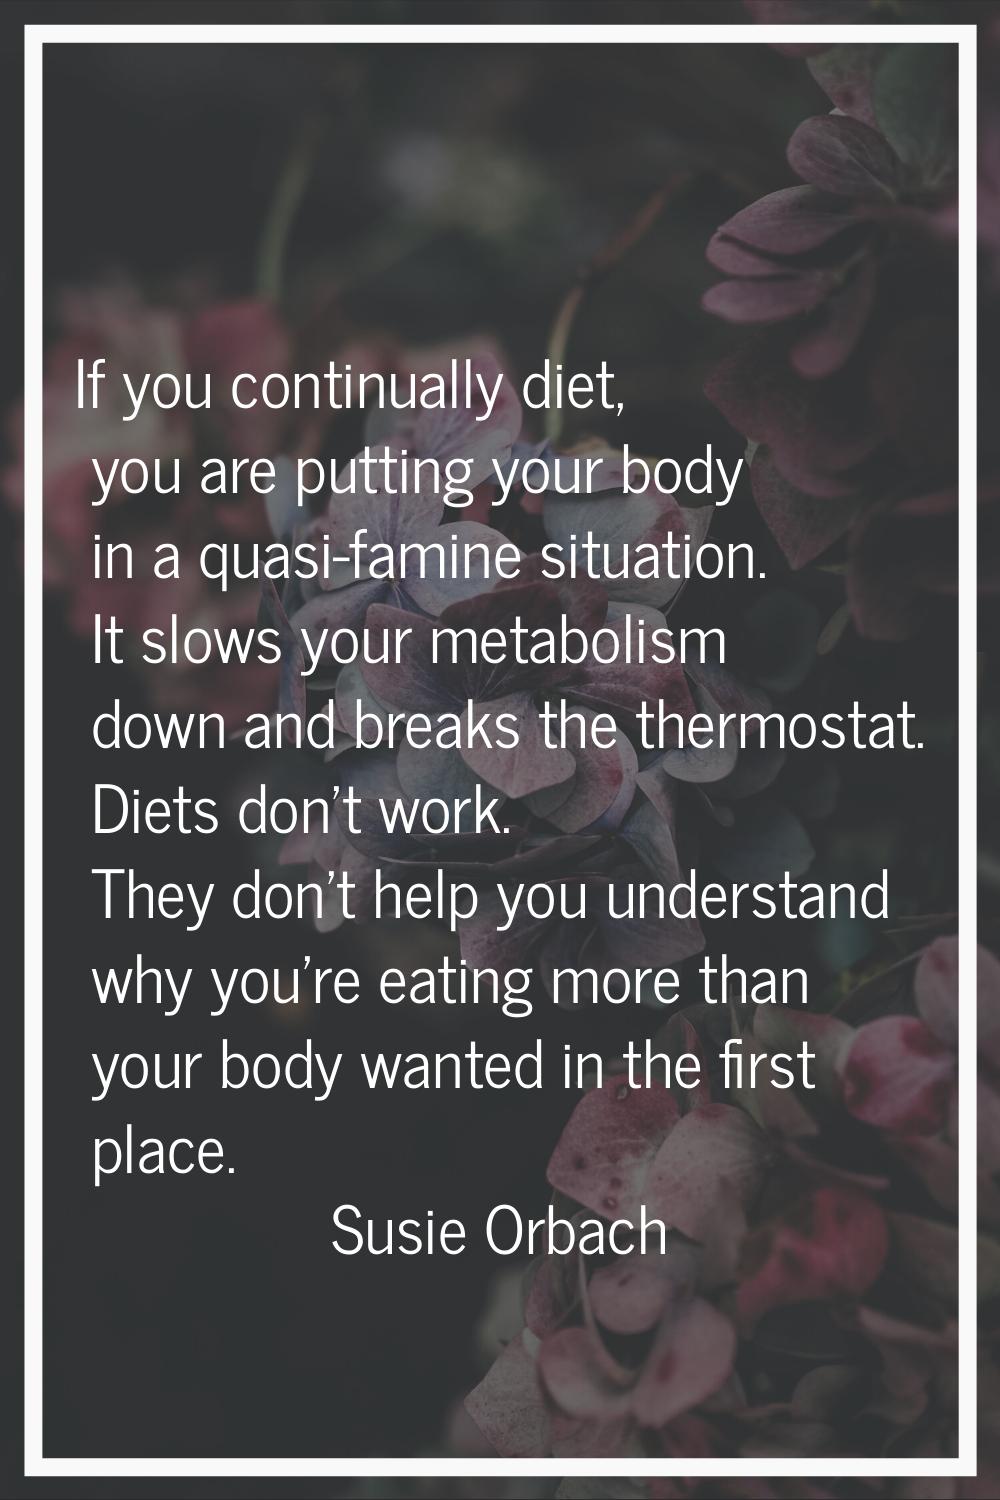 If you continually diet, you are putting your body in a quasi-famine situation. It slows your metab